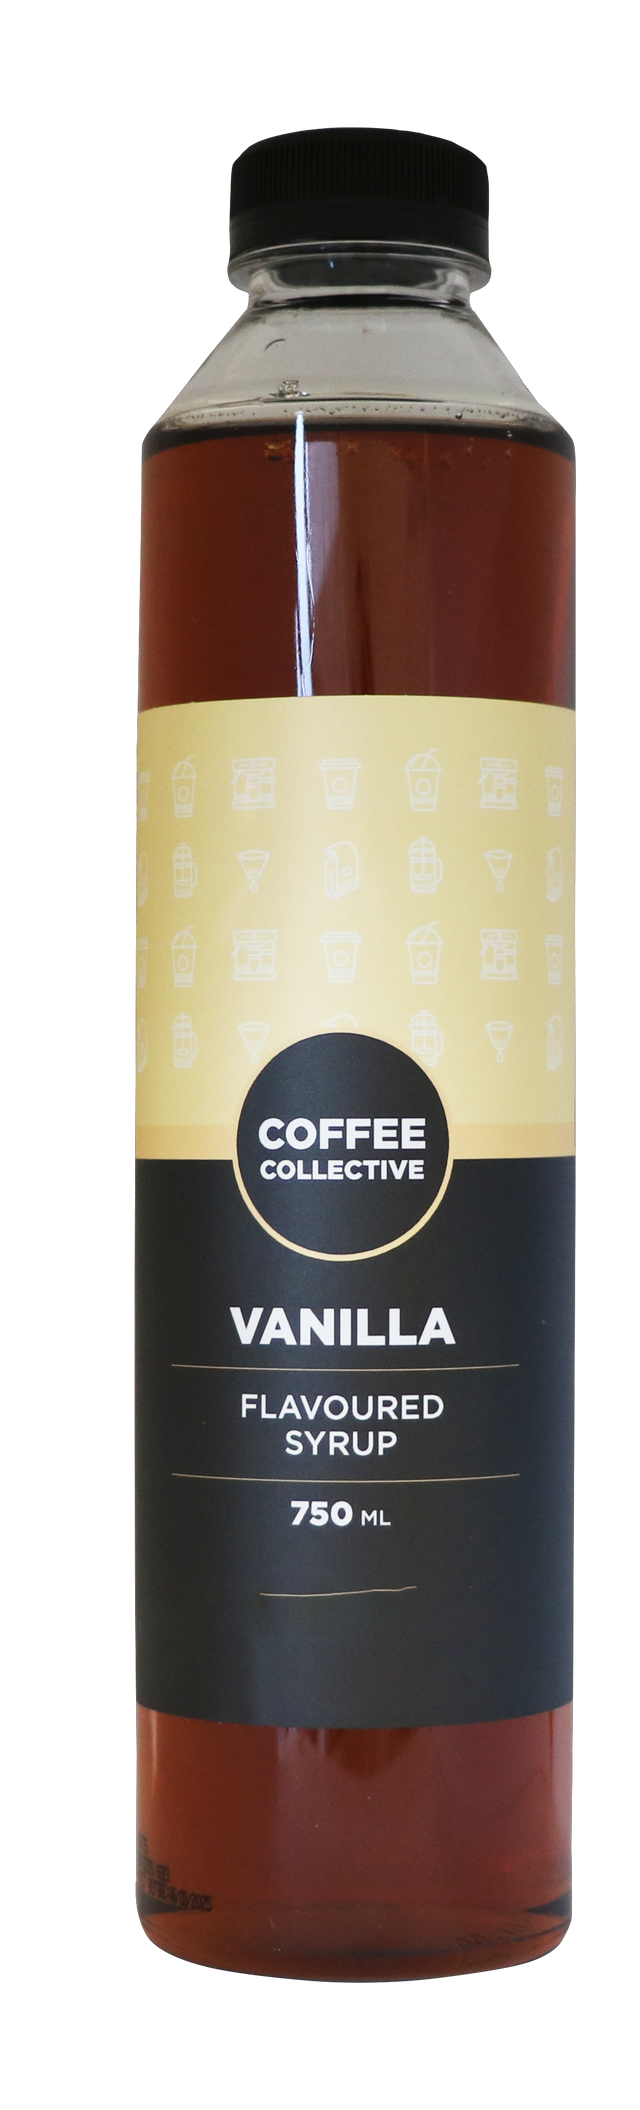 Coffee Collective Syrup - Vanilla 750ml Bottle